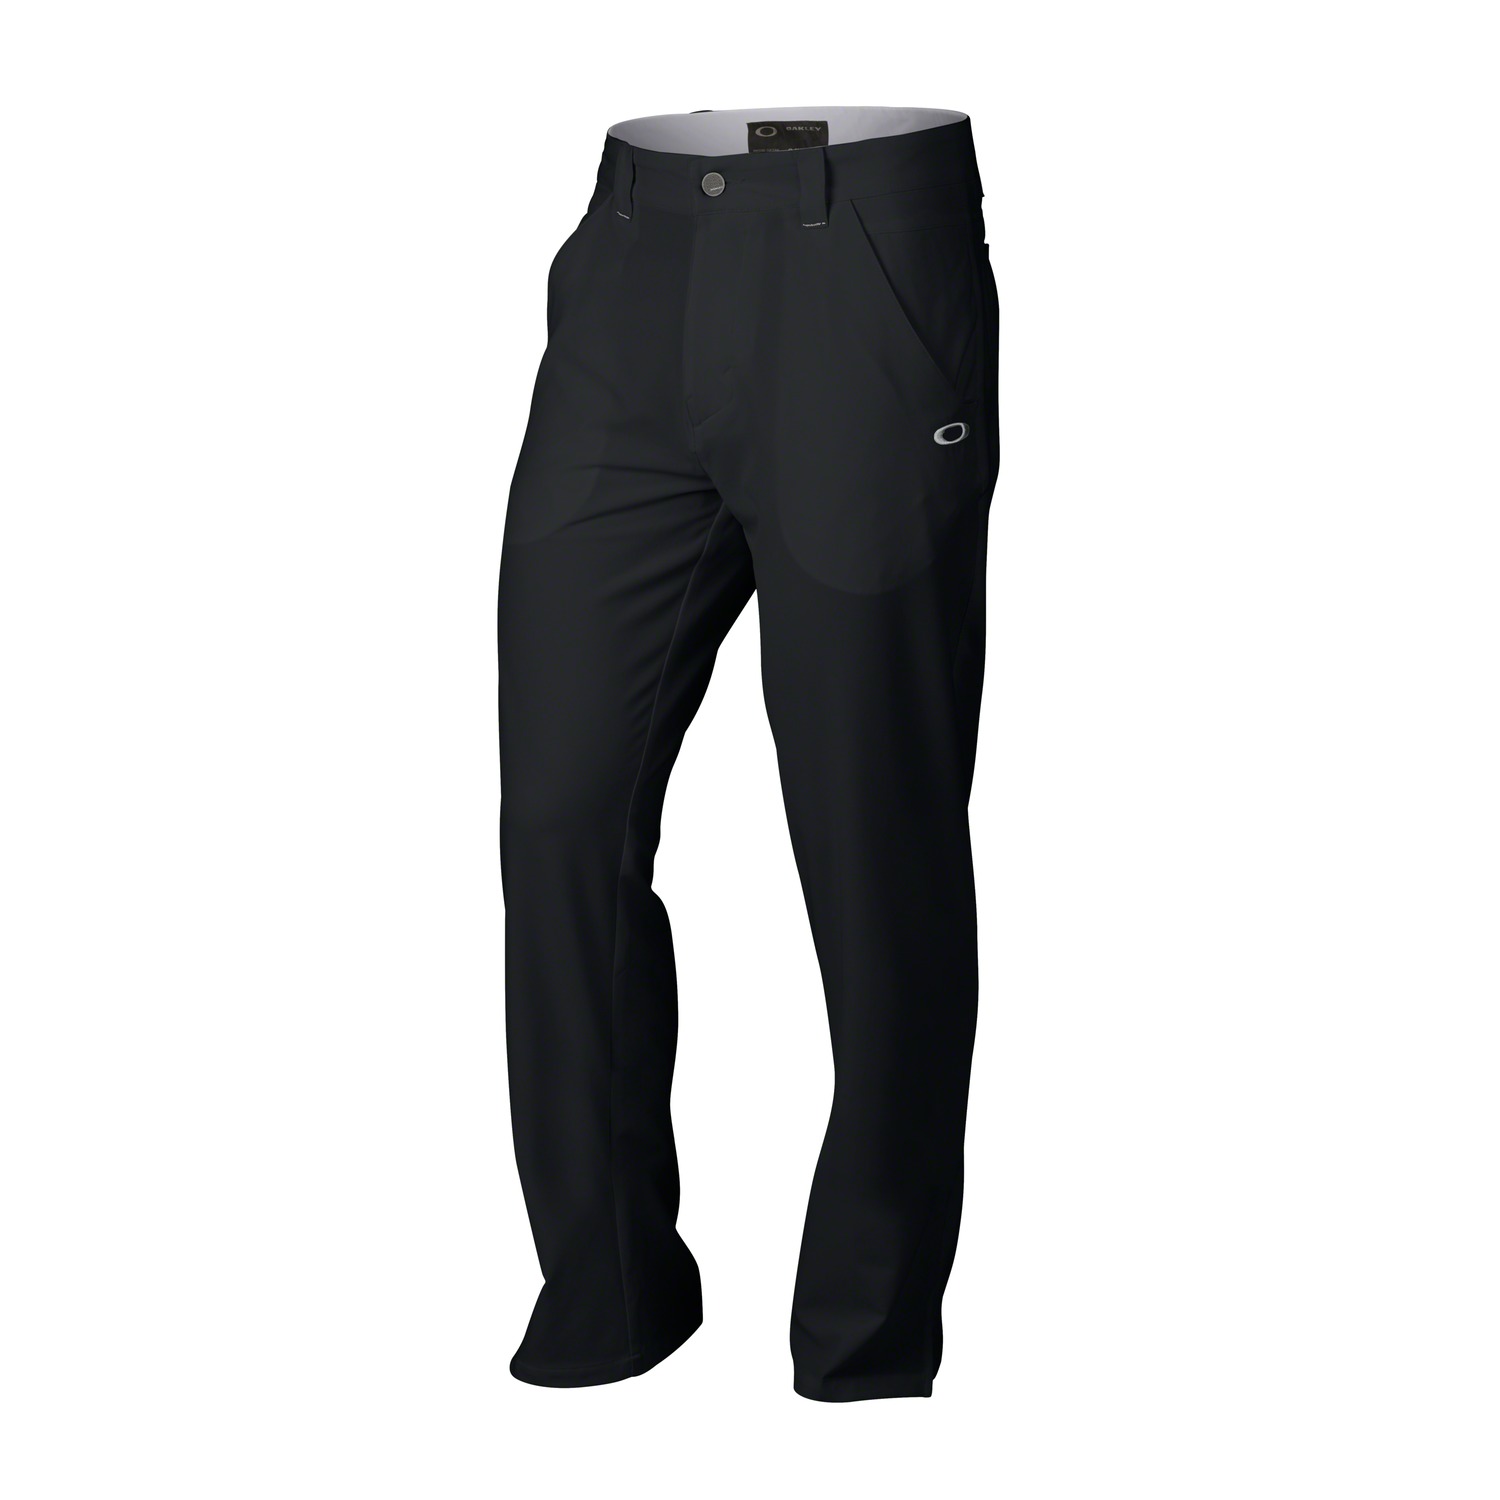 72% off on Men's Take  Golf Pants | OneDayOnly